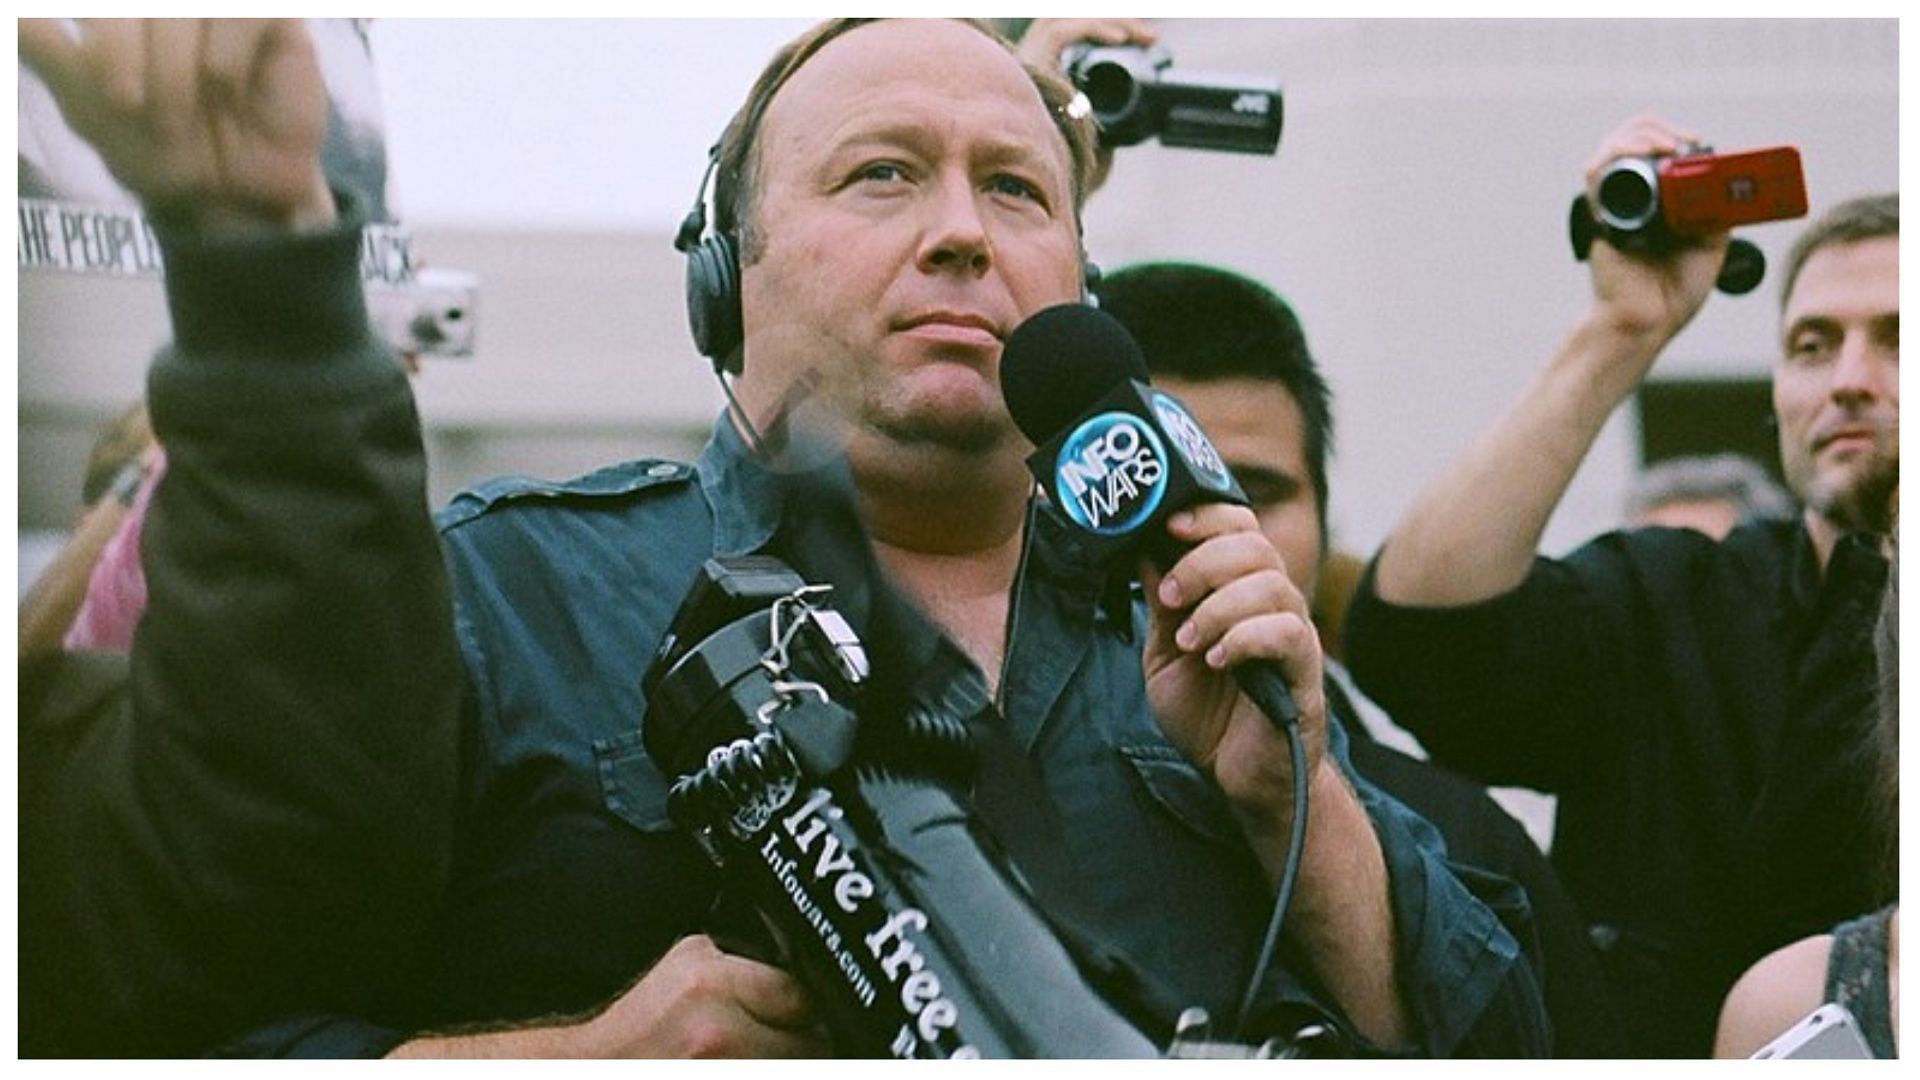 Alex Jones has been forced to pay $45 million in punitive damages (image via Sean P Anderson)